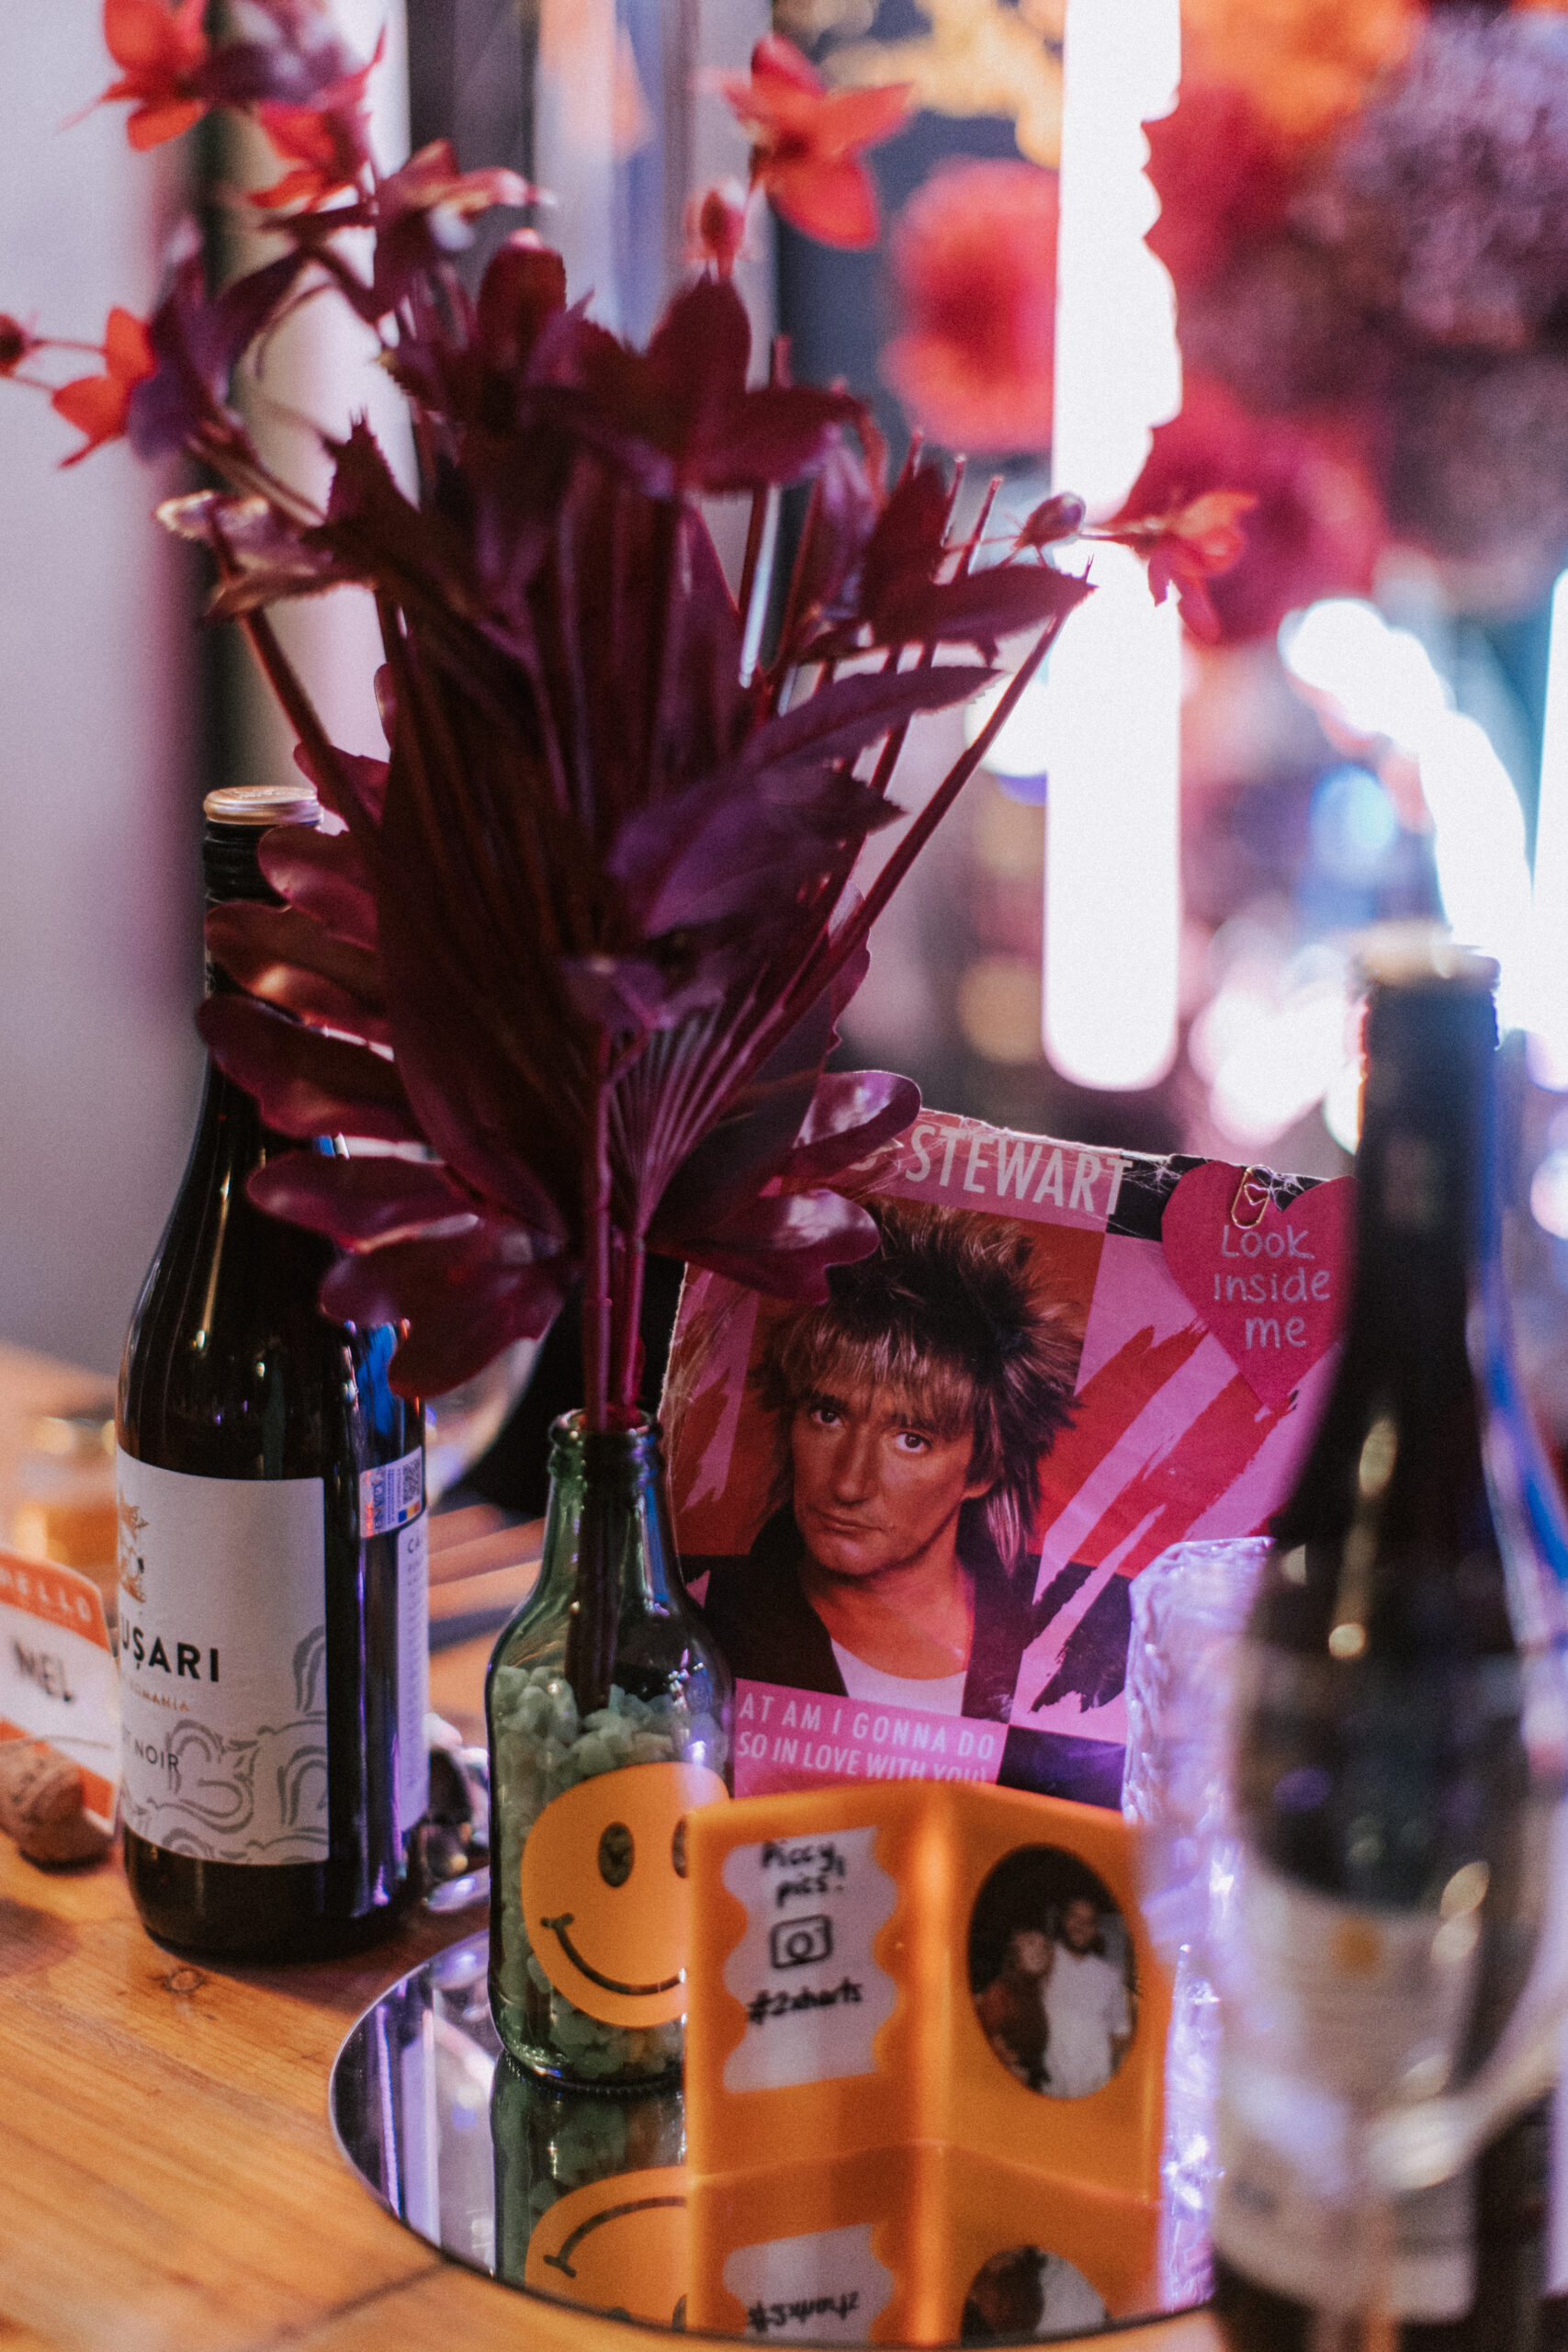 alternative wedding table with record player and beer bottles